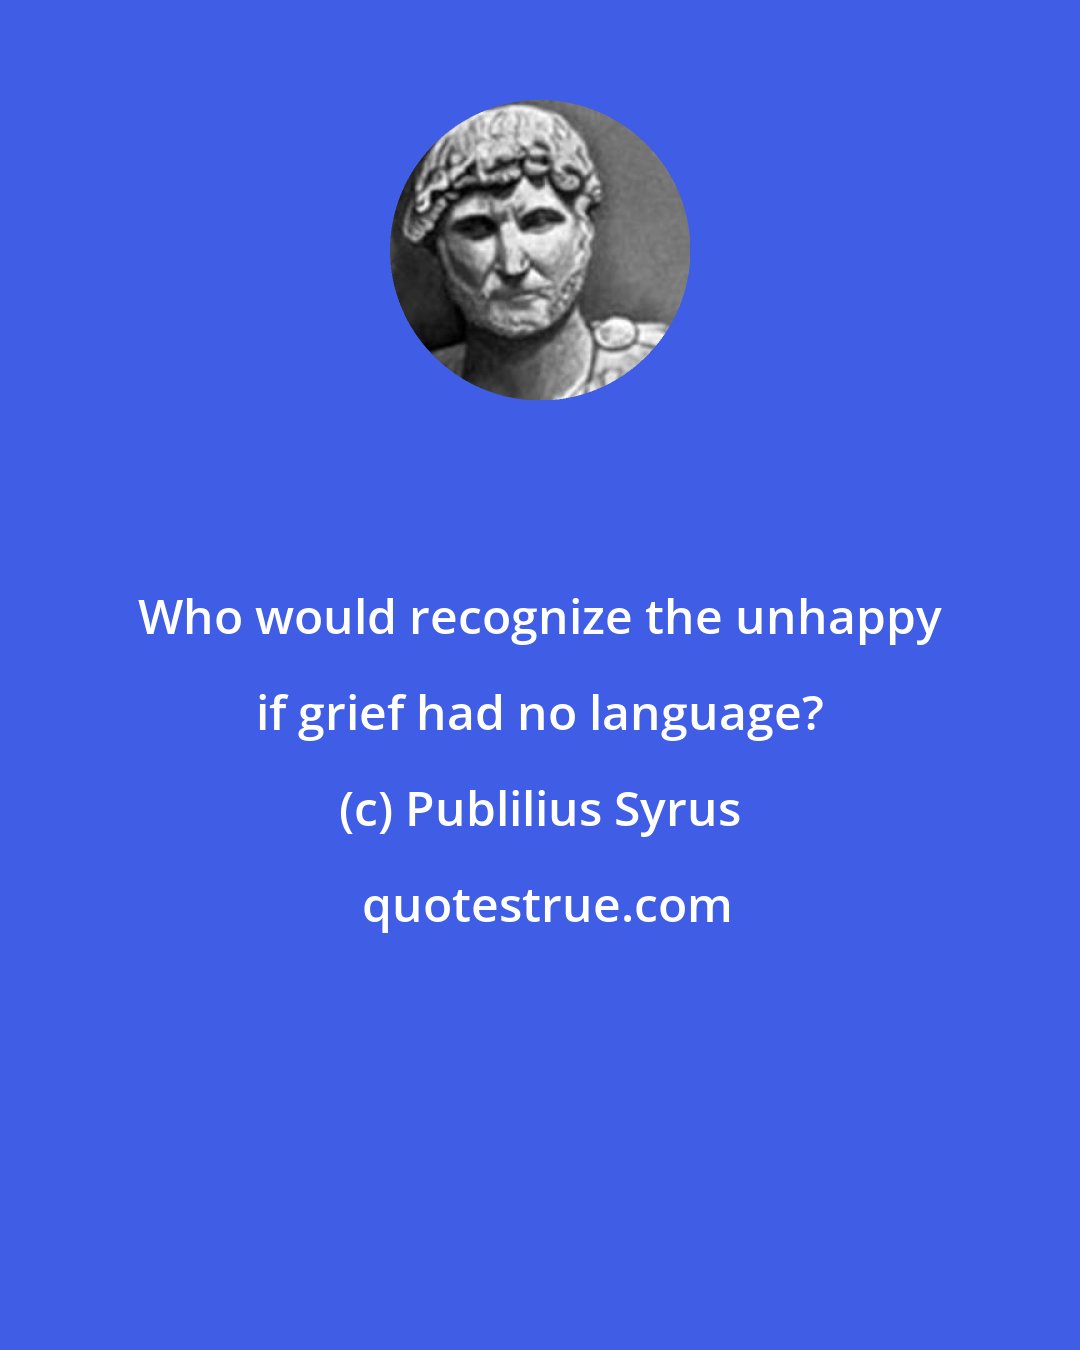 Publilius Syrus: Who would recognize the unhappy if grief had no language?